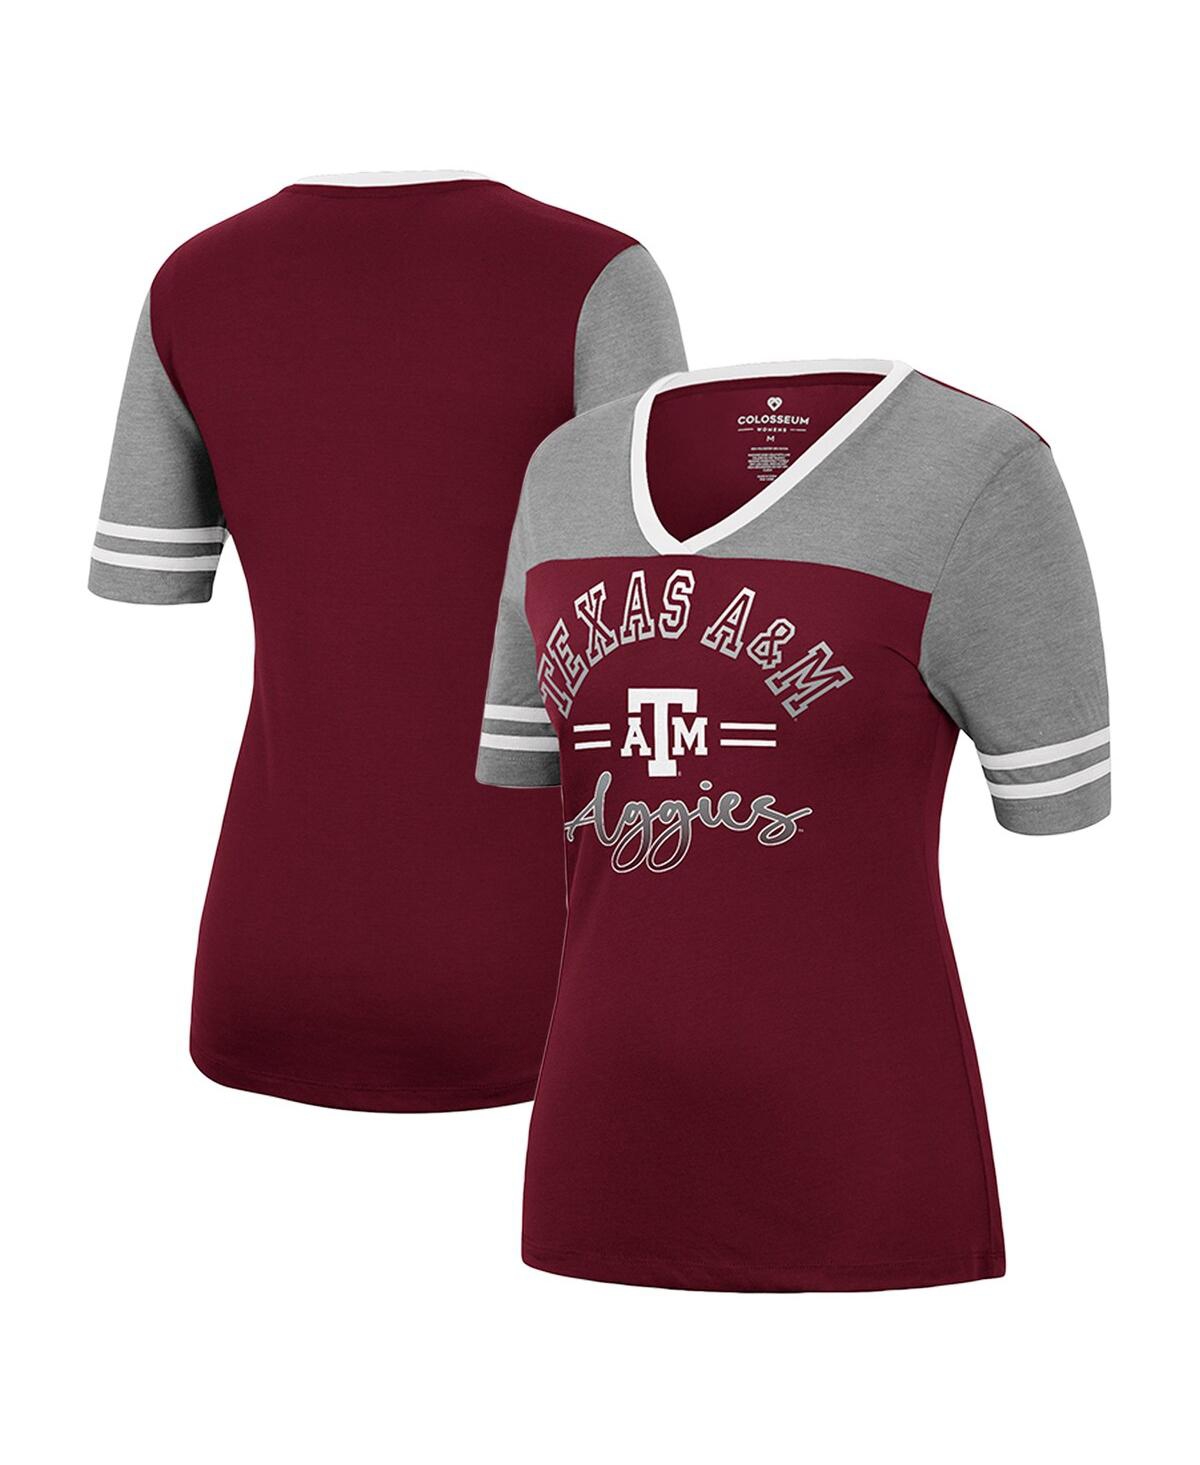 Women's Colosseum Maroon, Heathered Gray Texas A&M Aggies There You Are V-Neck T-shirt - Maroon, Heathered Gray